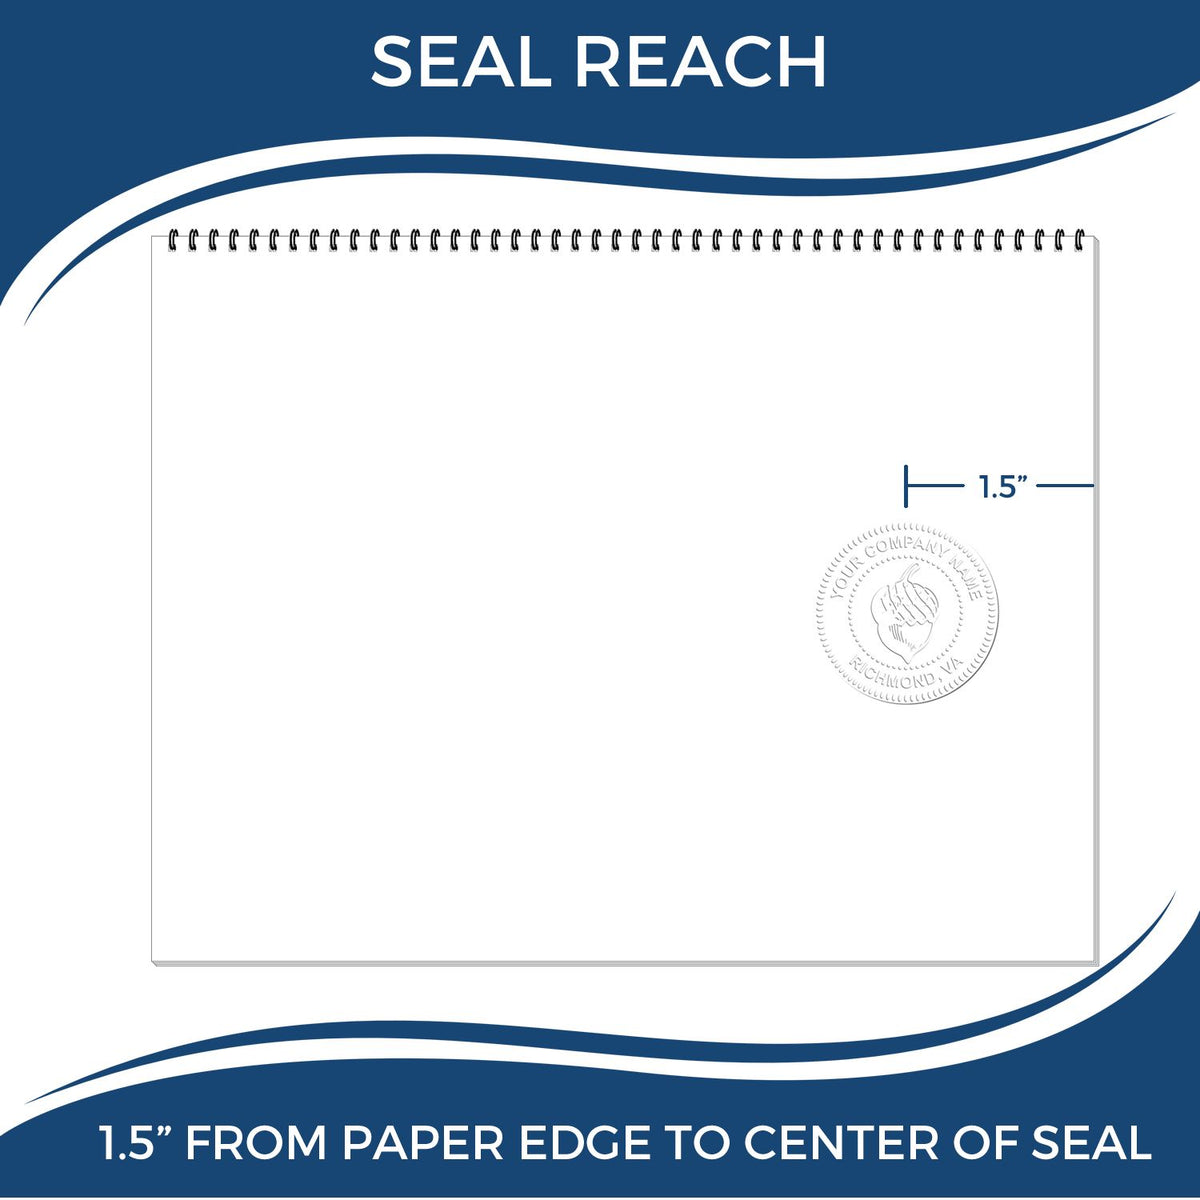 An infographic showing the seal reach which is represented by a ruler and a miniature seal image of the Handheld Kansas Professional Engineer Embosser